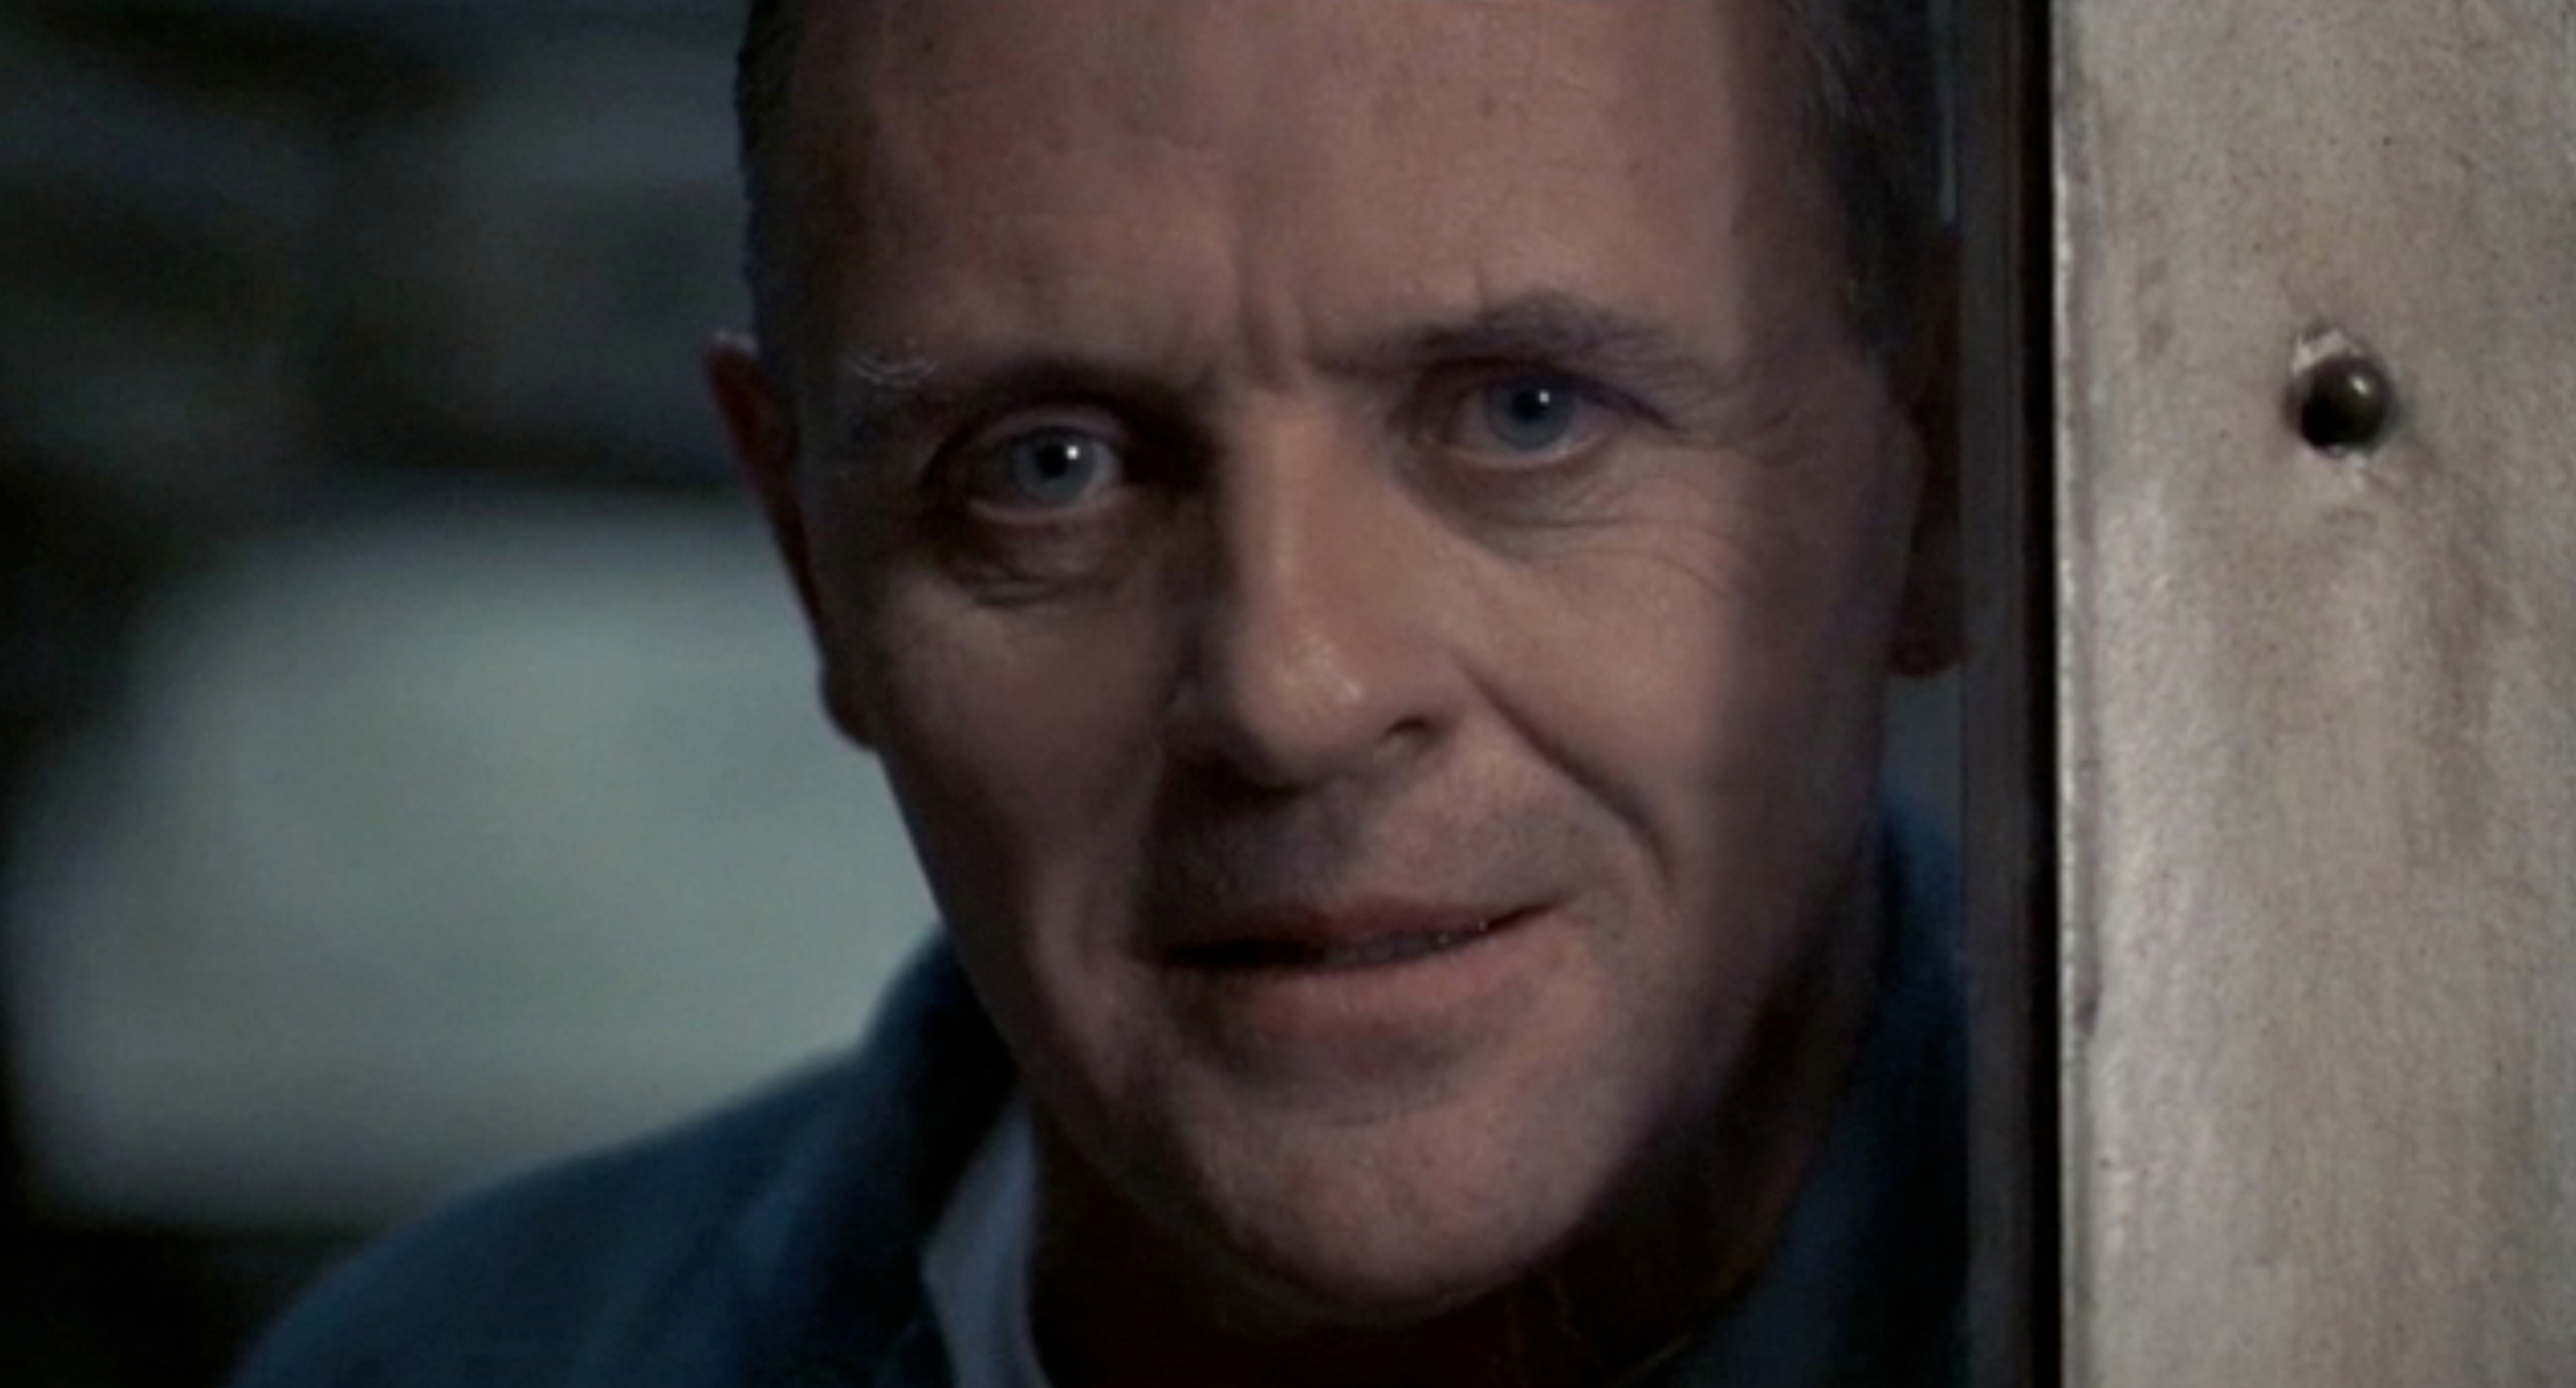 Anthony Hopkins as Dr. Hannibal “The Cannibal” Lecter in the 1991 film “Silence of the Lambs.” Photo Courtesy: MGM Home Entertainment